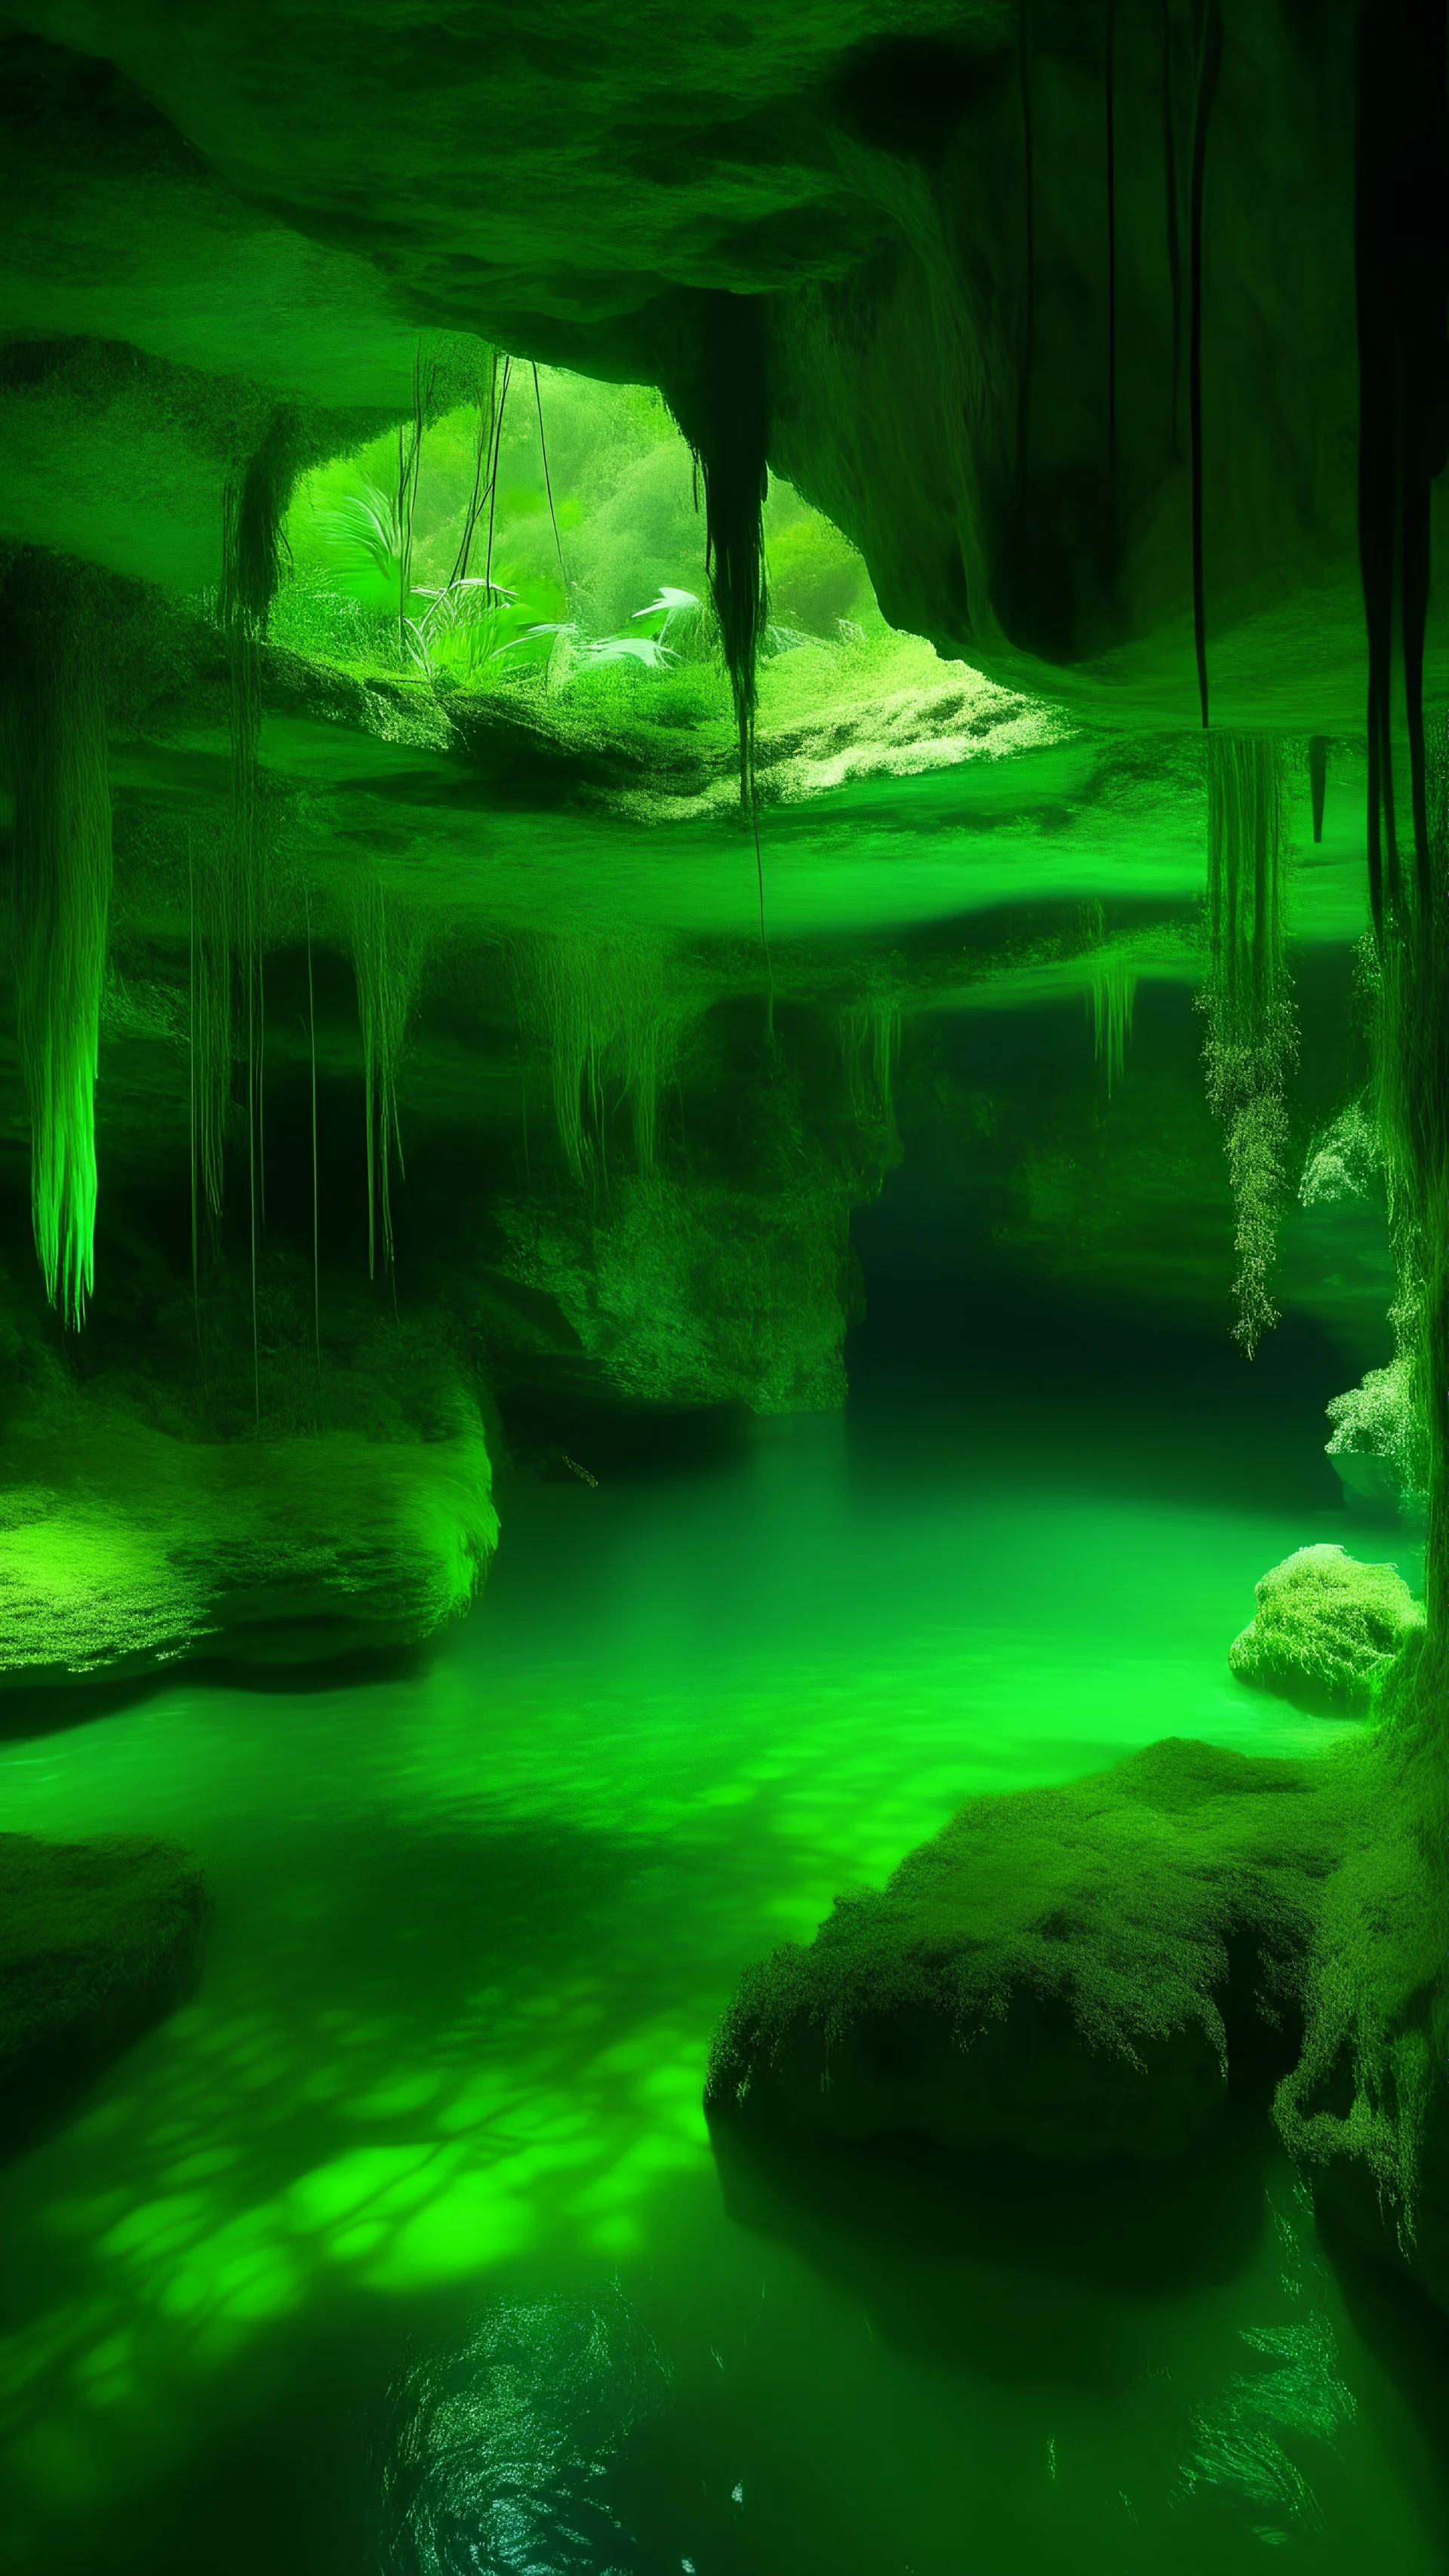 Represents the Mayan hell with nature, green colors, cave